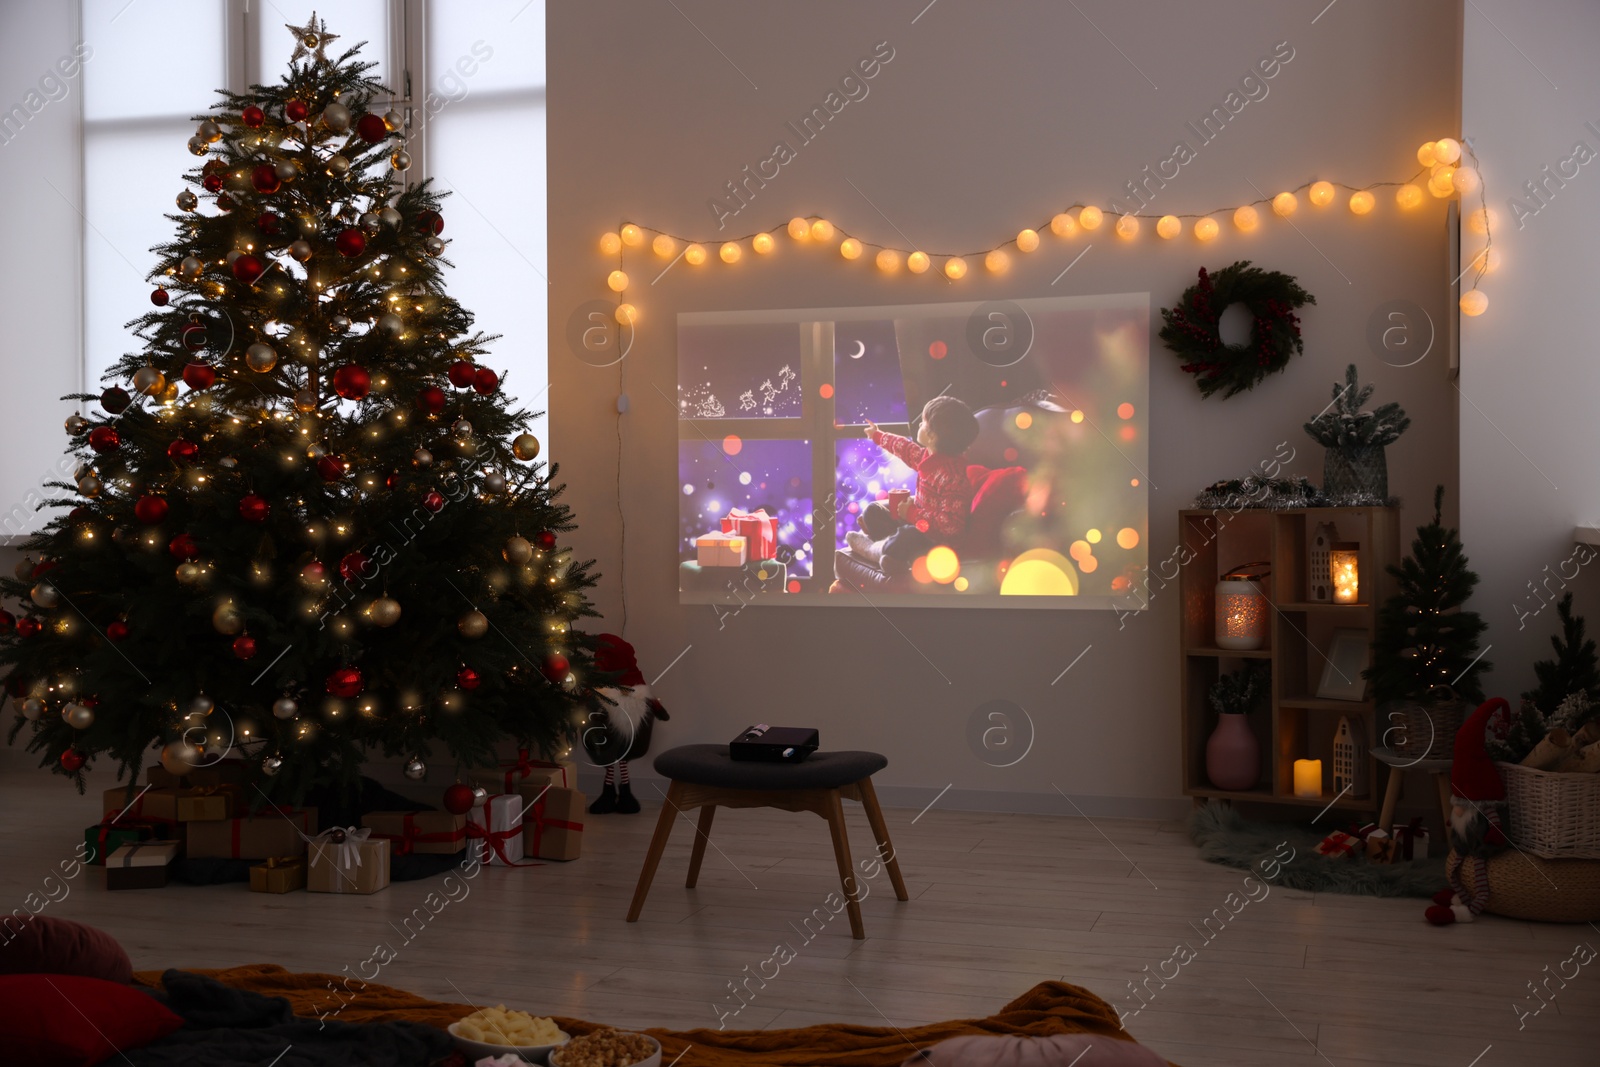 Photo of Video projector, Christmas tree, snacks, gifts and decorations in room